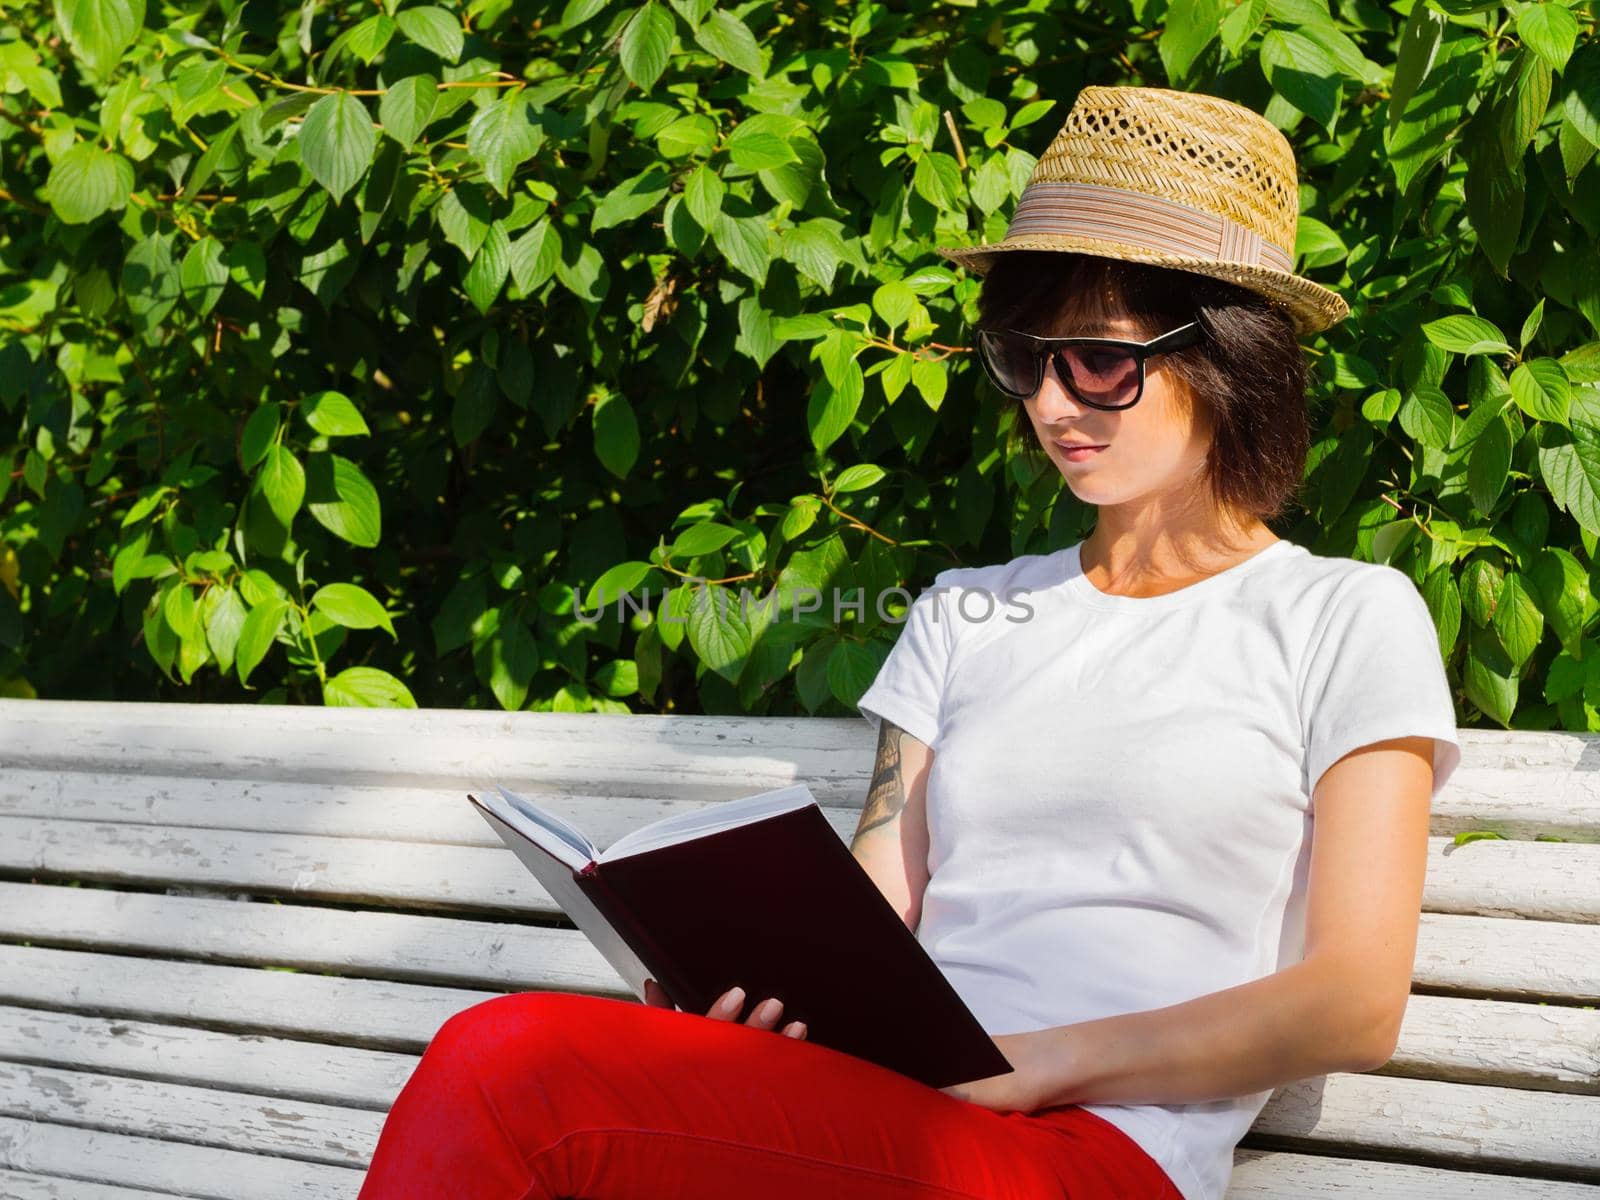 Hipster woman reading a book on a bench in a summer garden, side view